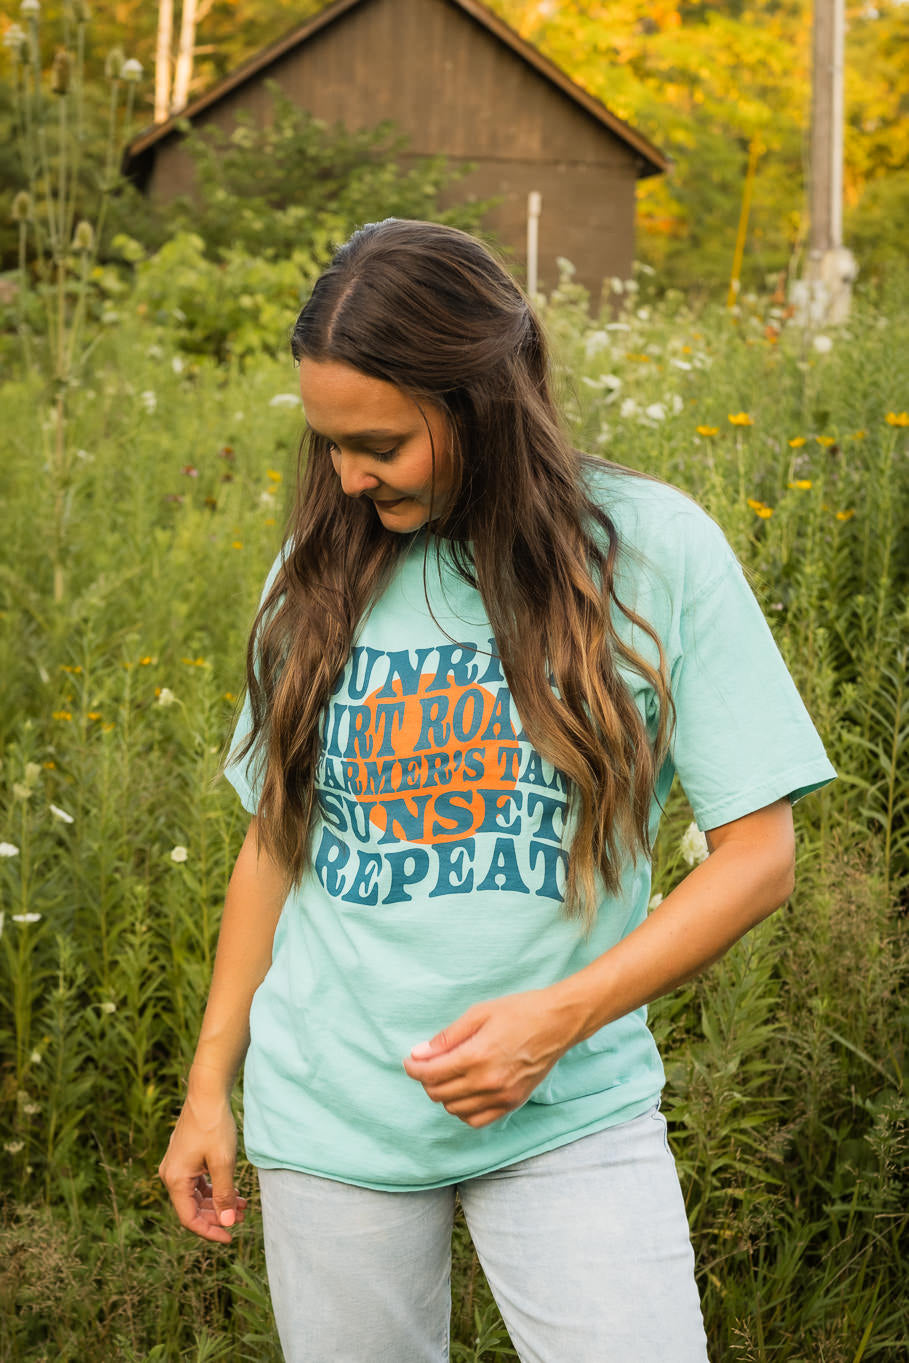 Sunrise, Sunset, Repeat Graphic Tee in Mint | Sizes S - 3XL